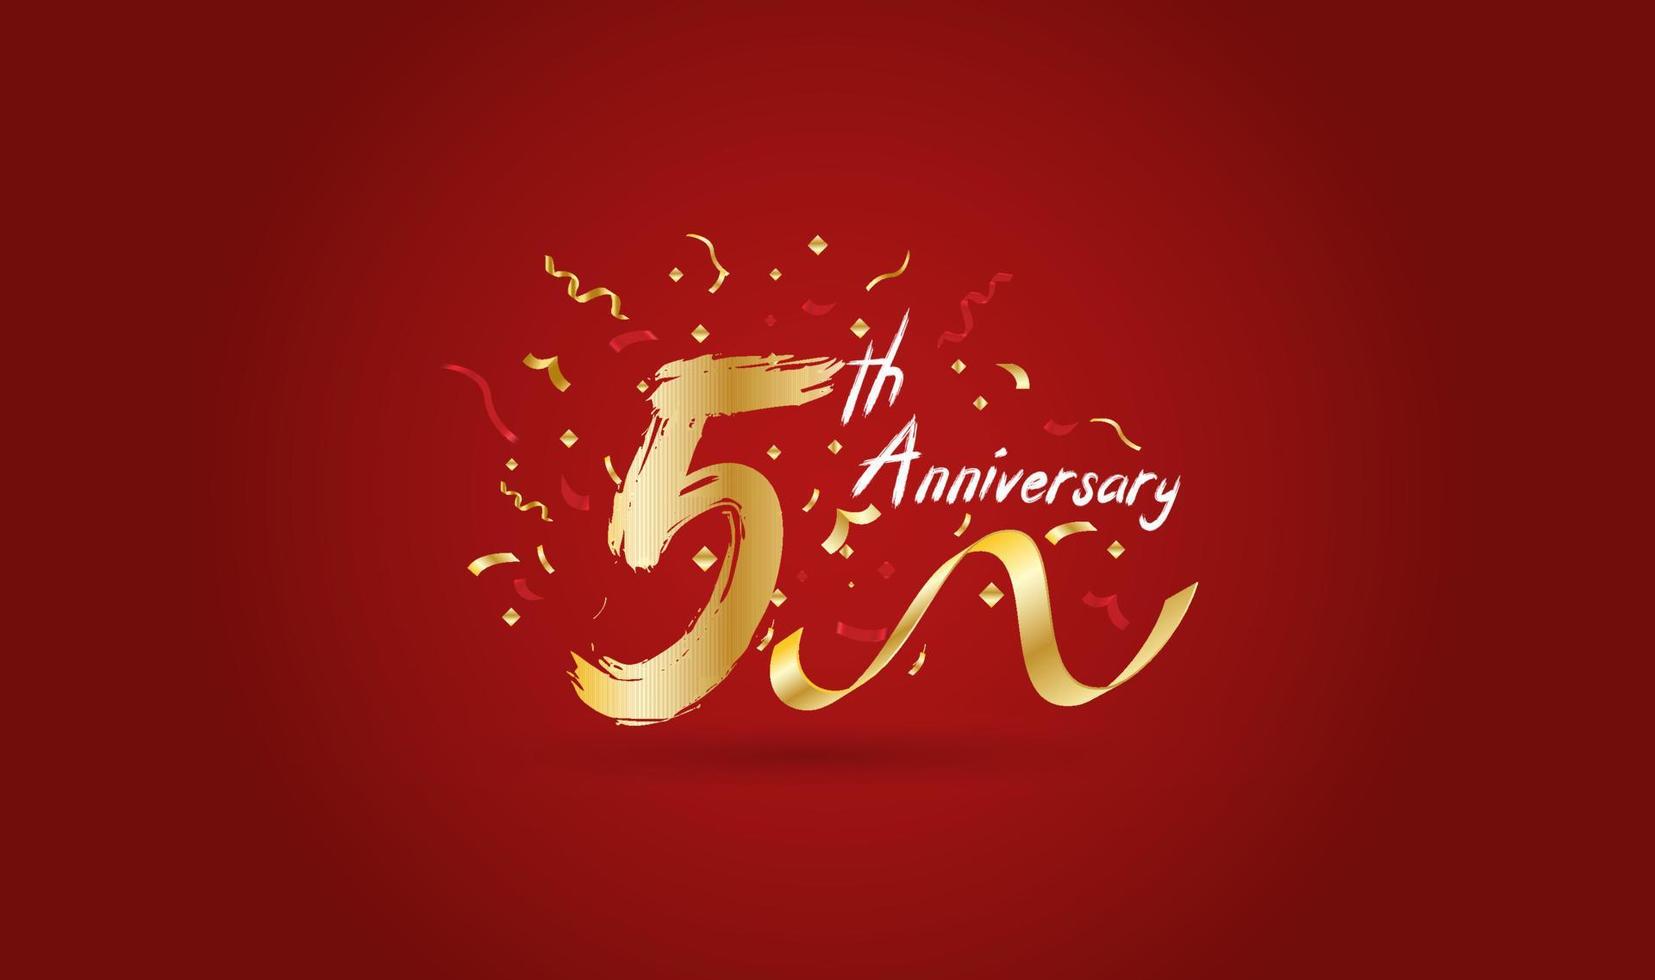 Anniversary celebration background. with the 5th number in gold and with the words golden anniversary celebration. vector